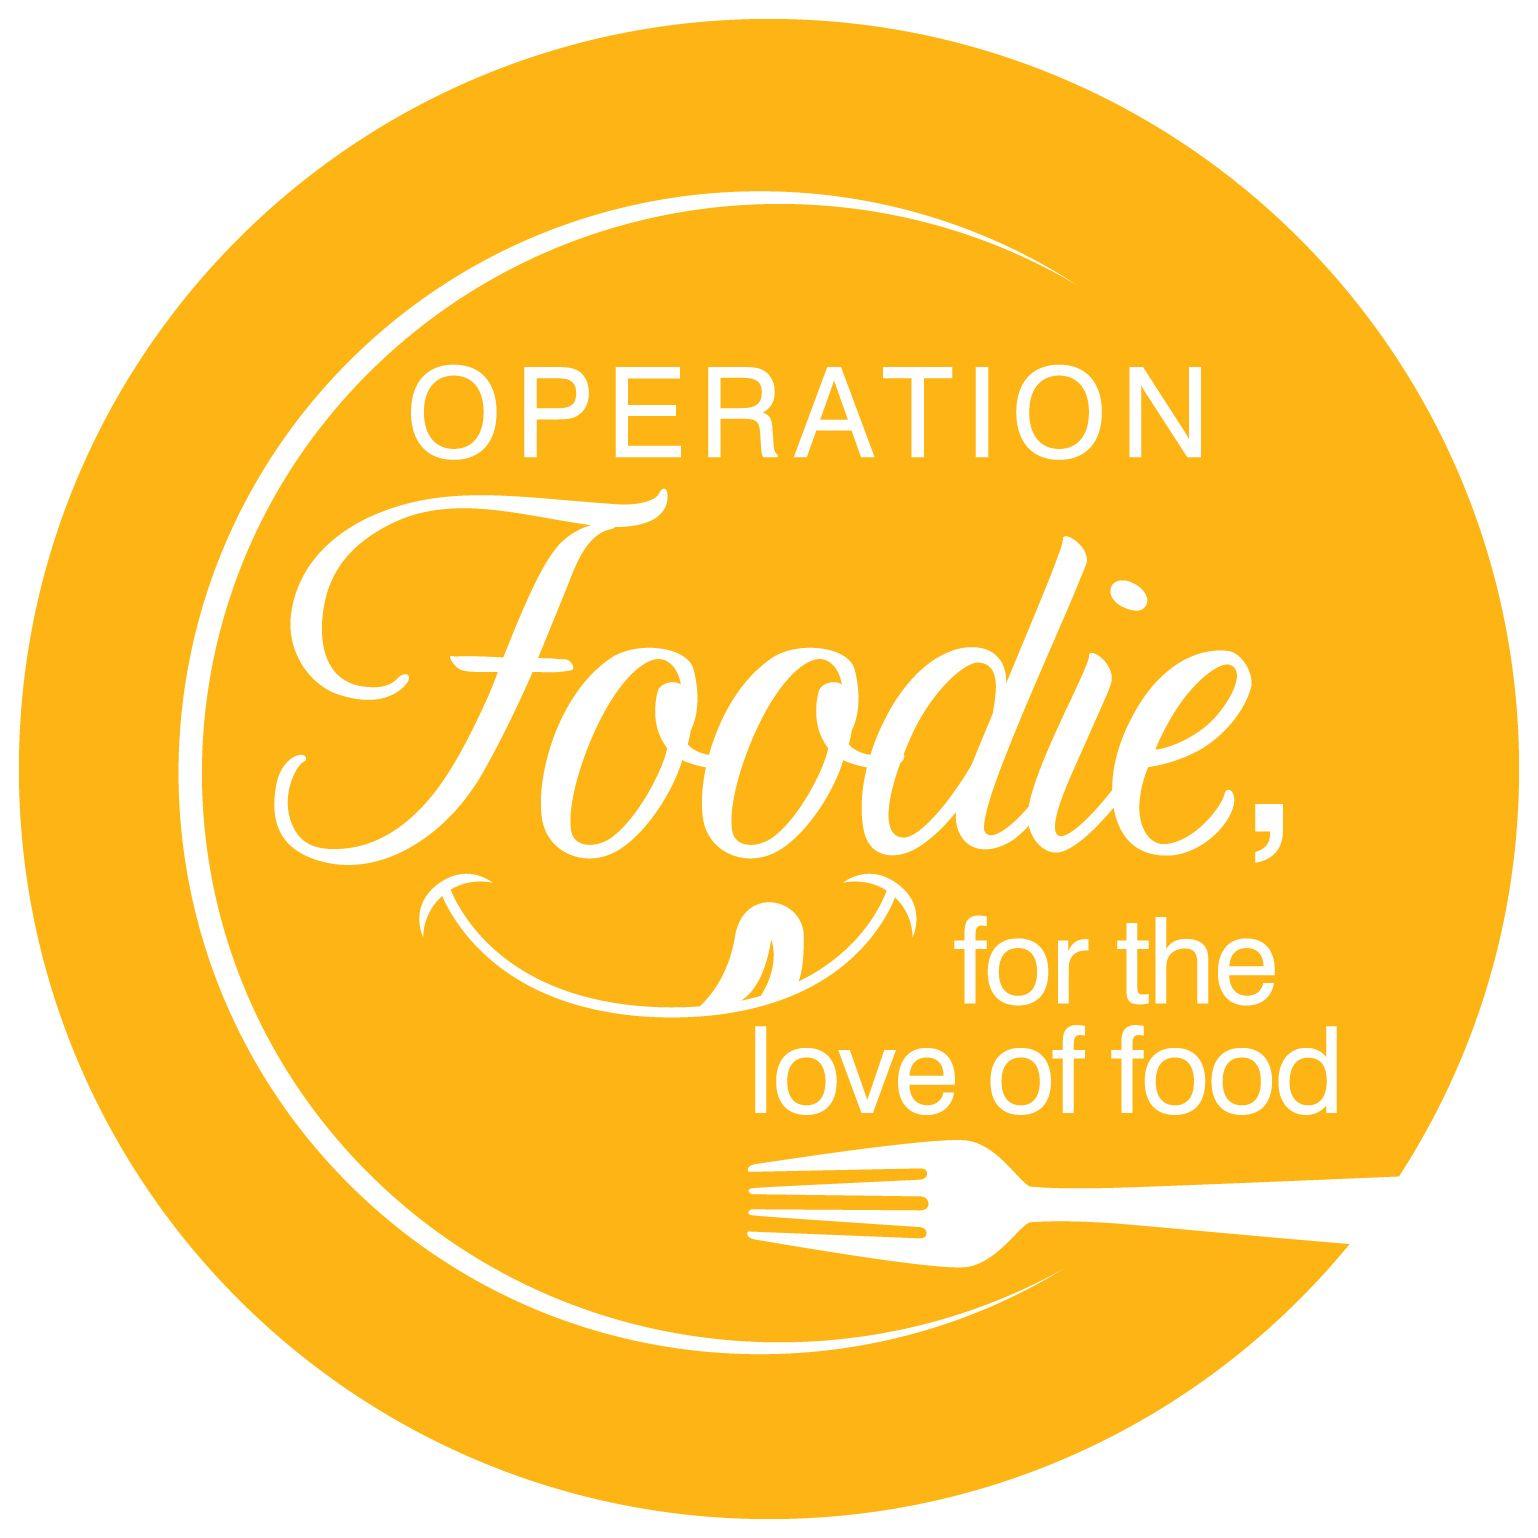 Foodie Logo - Operation Foodie – for the love of food… | Marshall Foundation